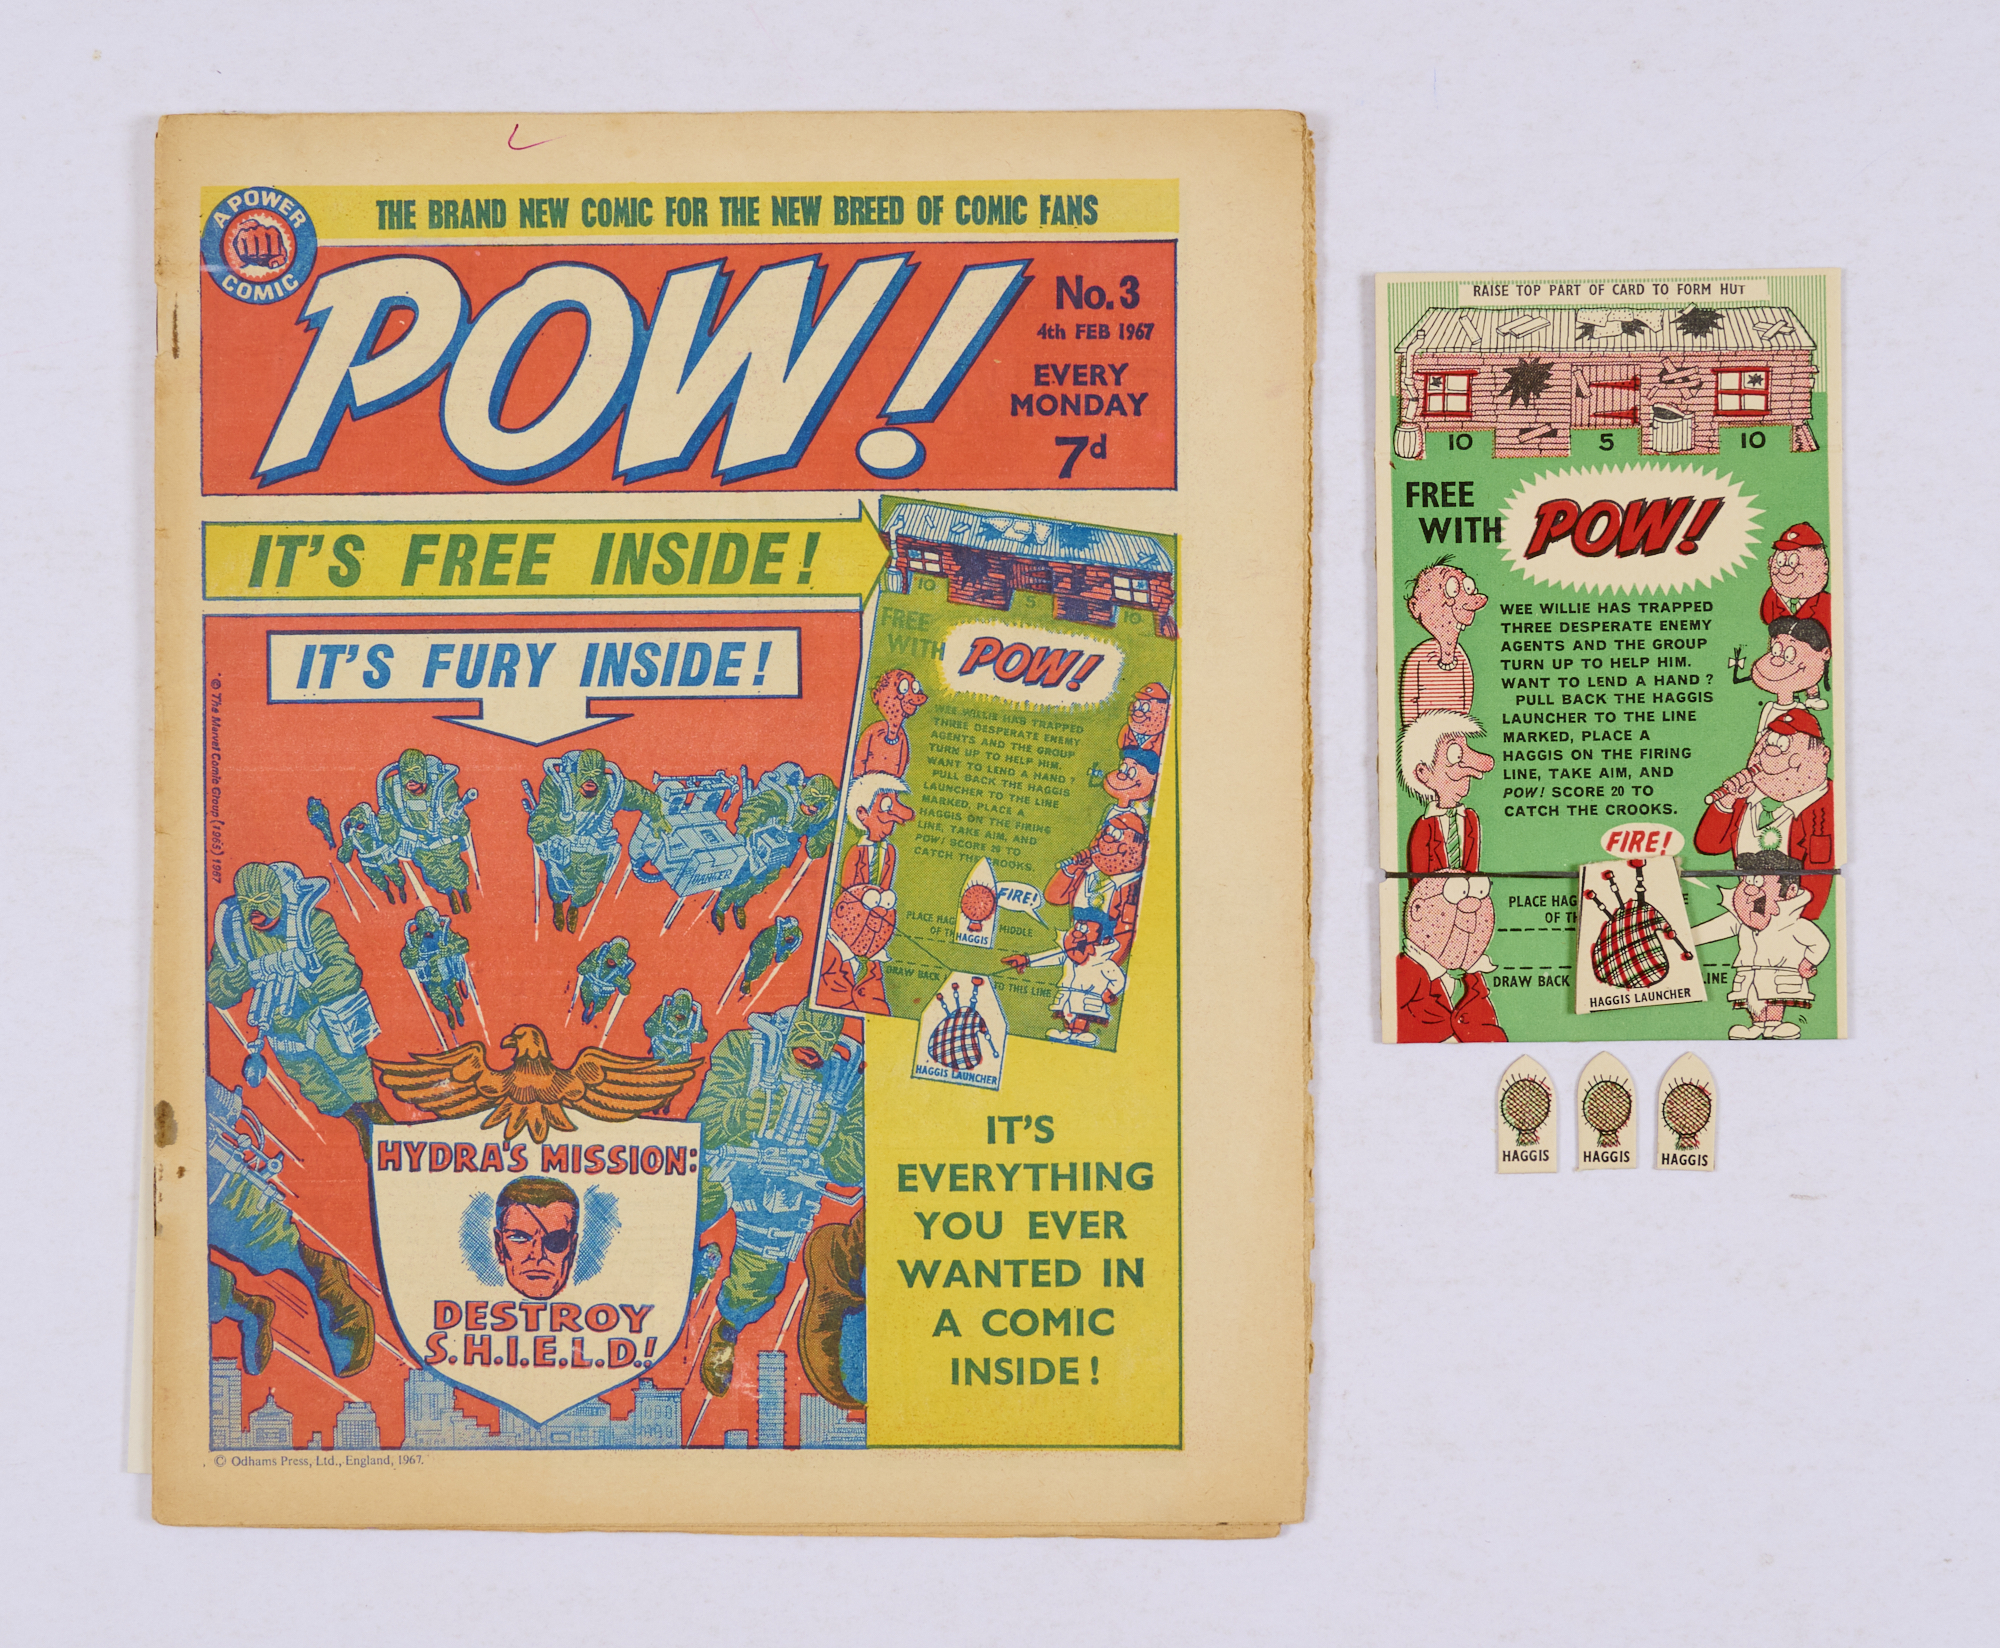 POW! No 3 (1967) wfg Haggis Launcher Game (missing 2 of the 5 Haggis bullets) [as new], comic [vg+]